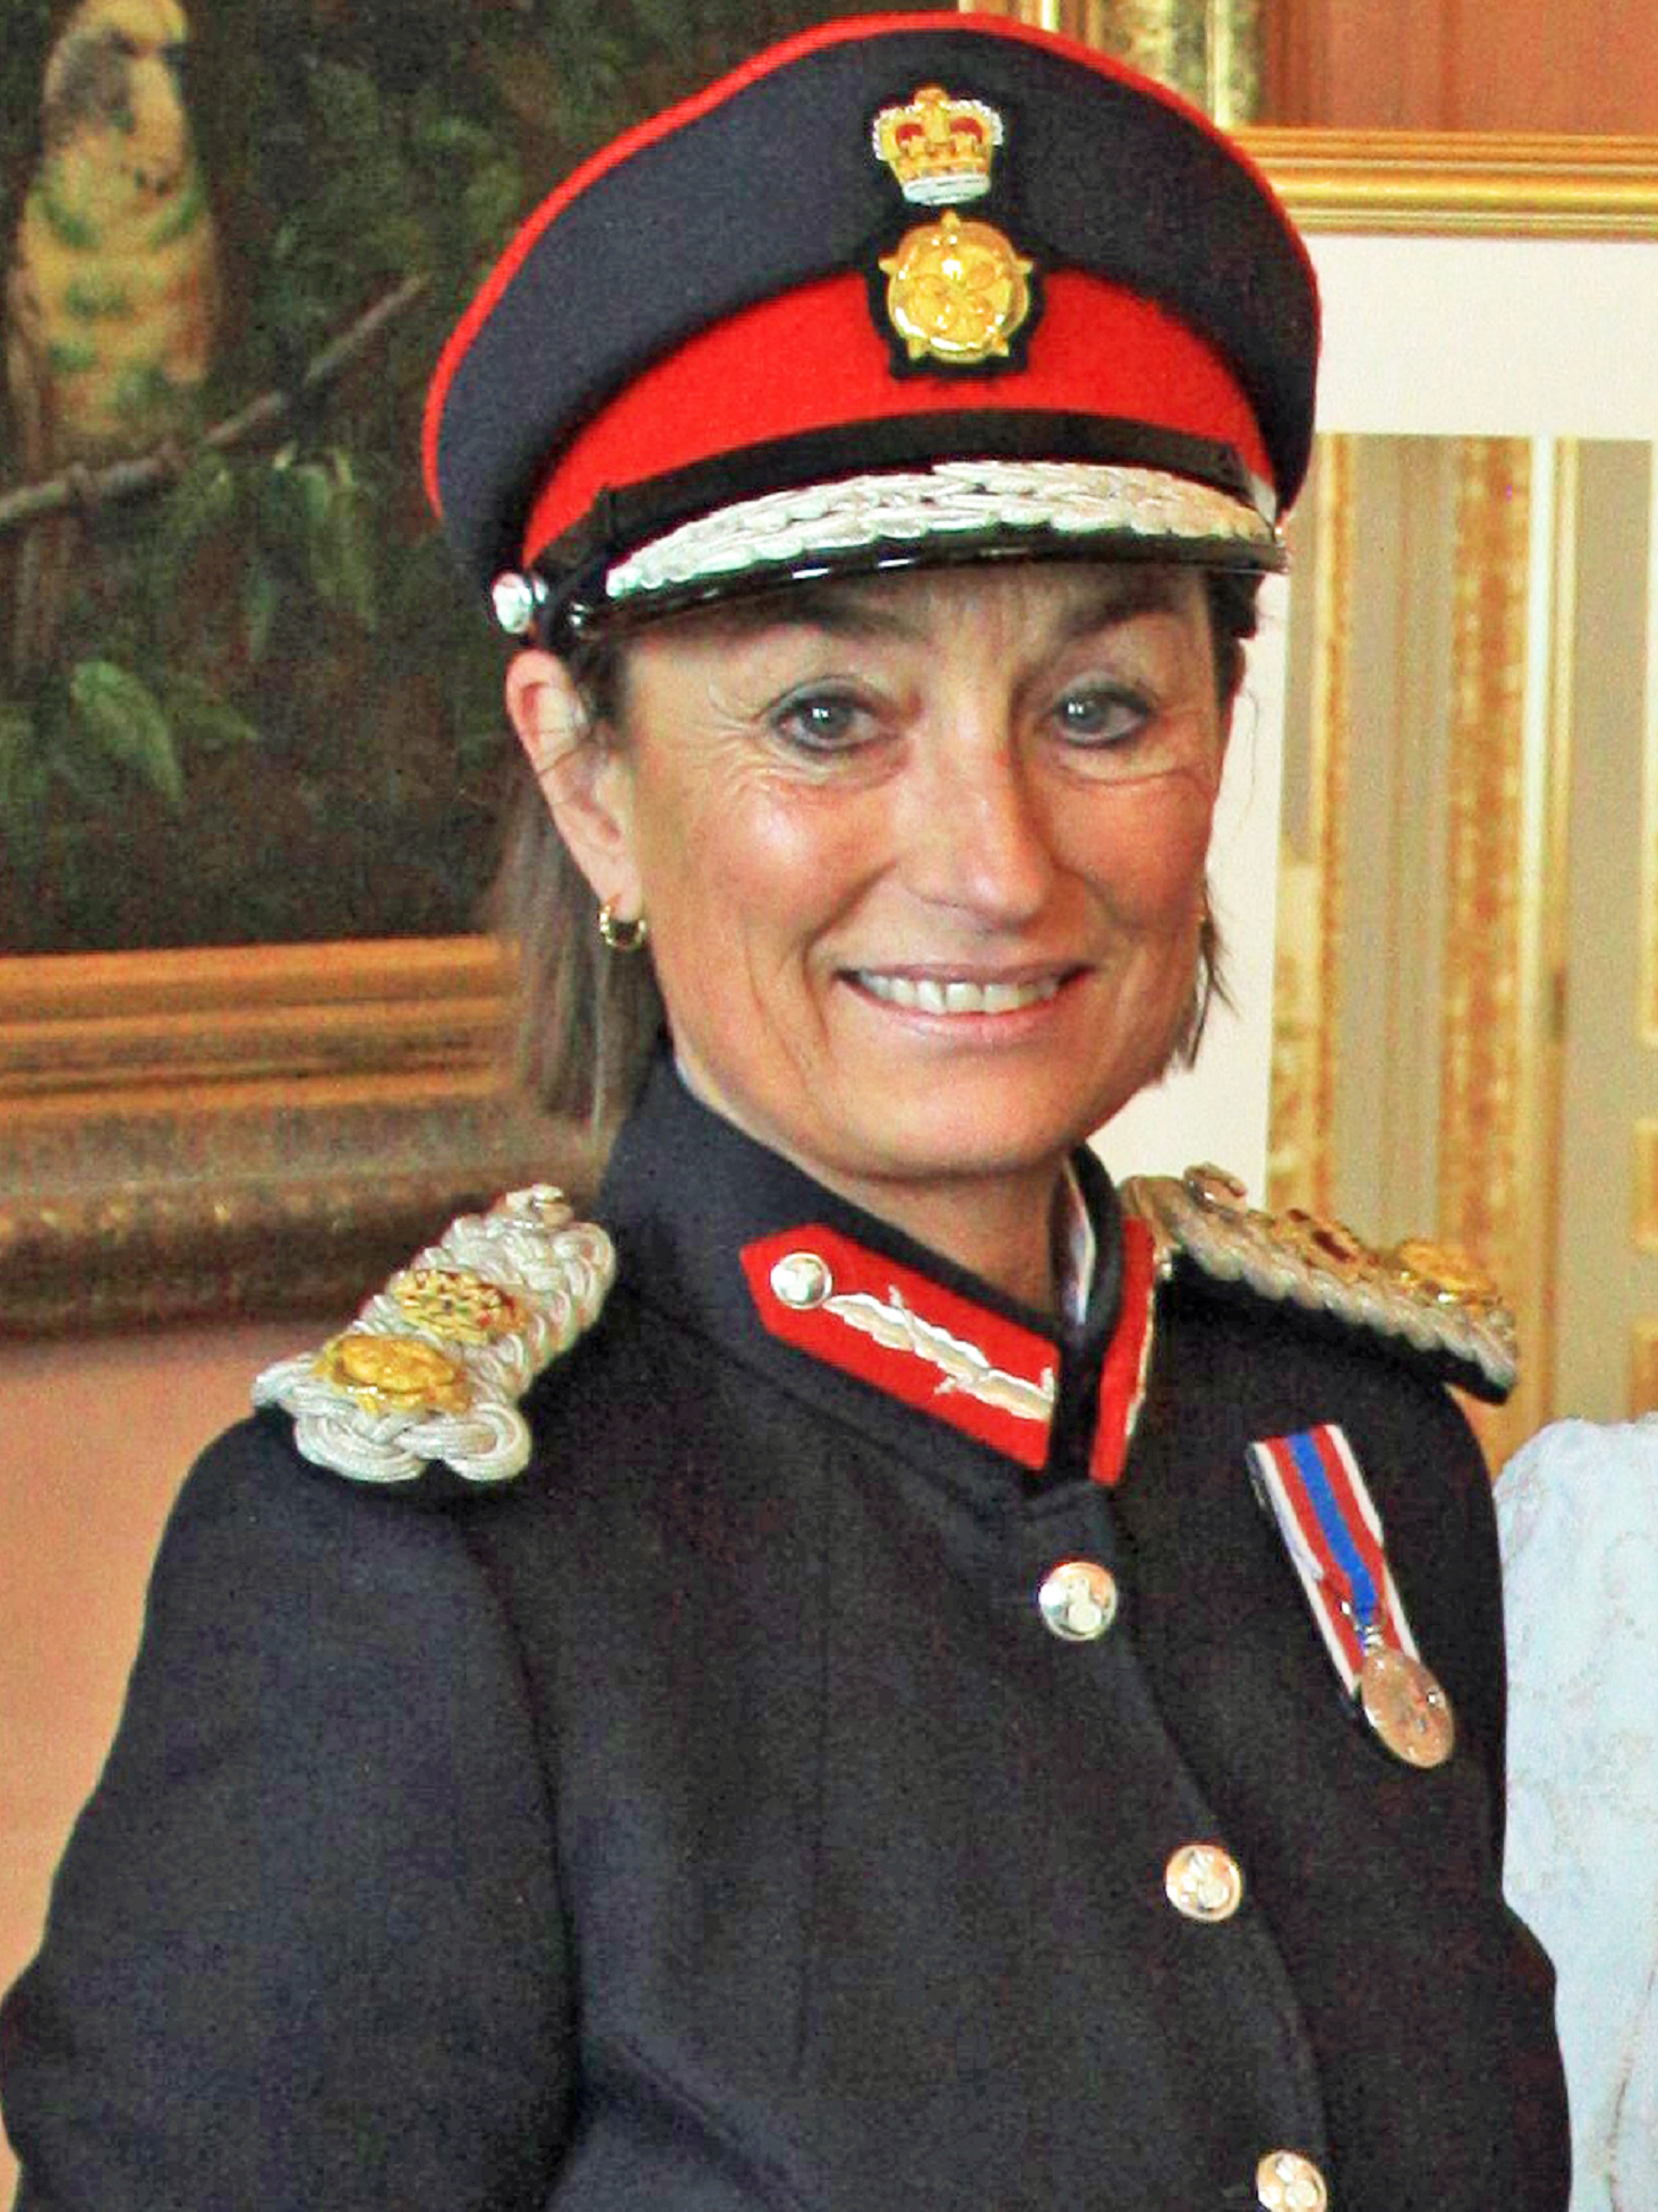 The Lord Lieutenant for North Yorkshire, Jo Ropner